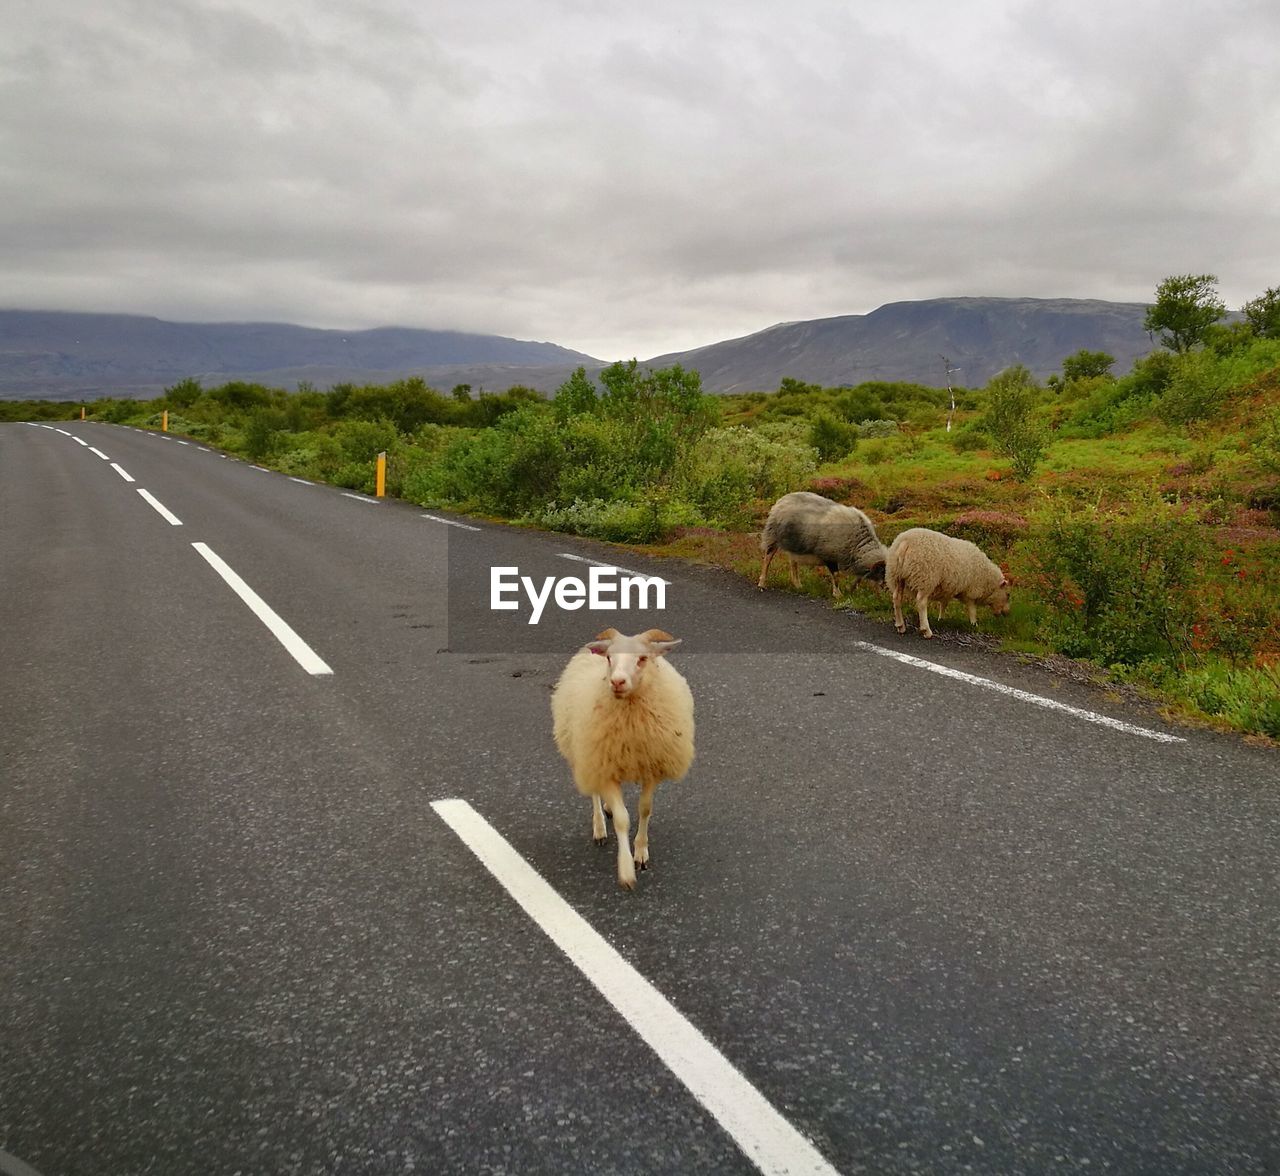 SHEEP ON ROAD BY MOUNTAINS AGAINST SKY